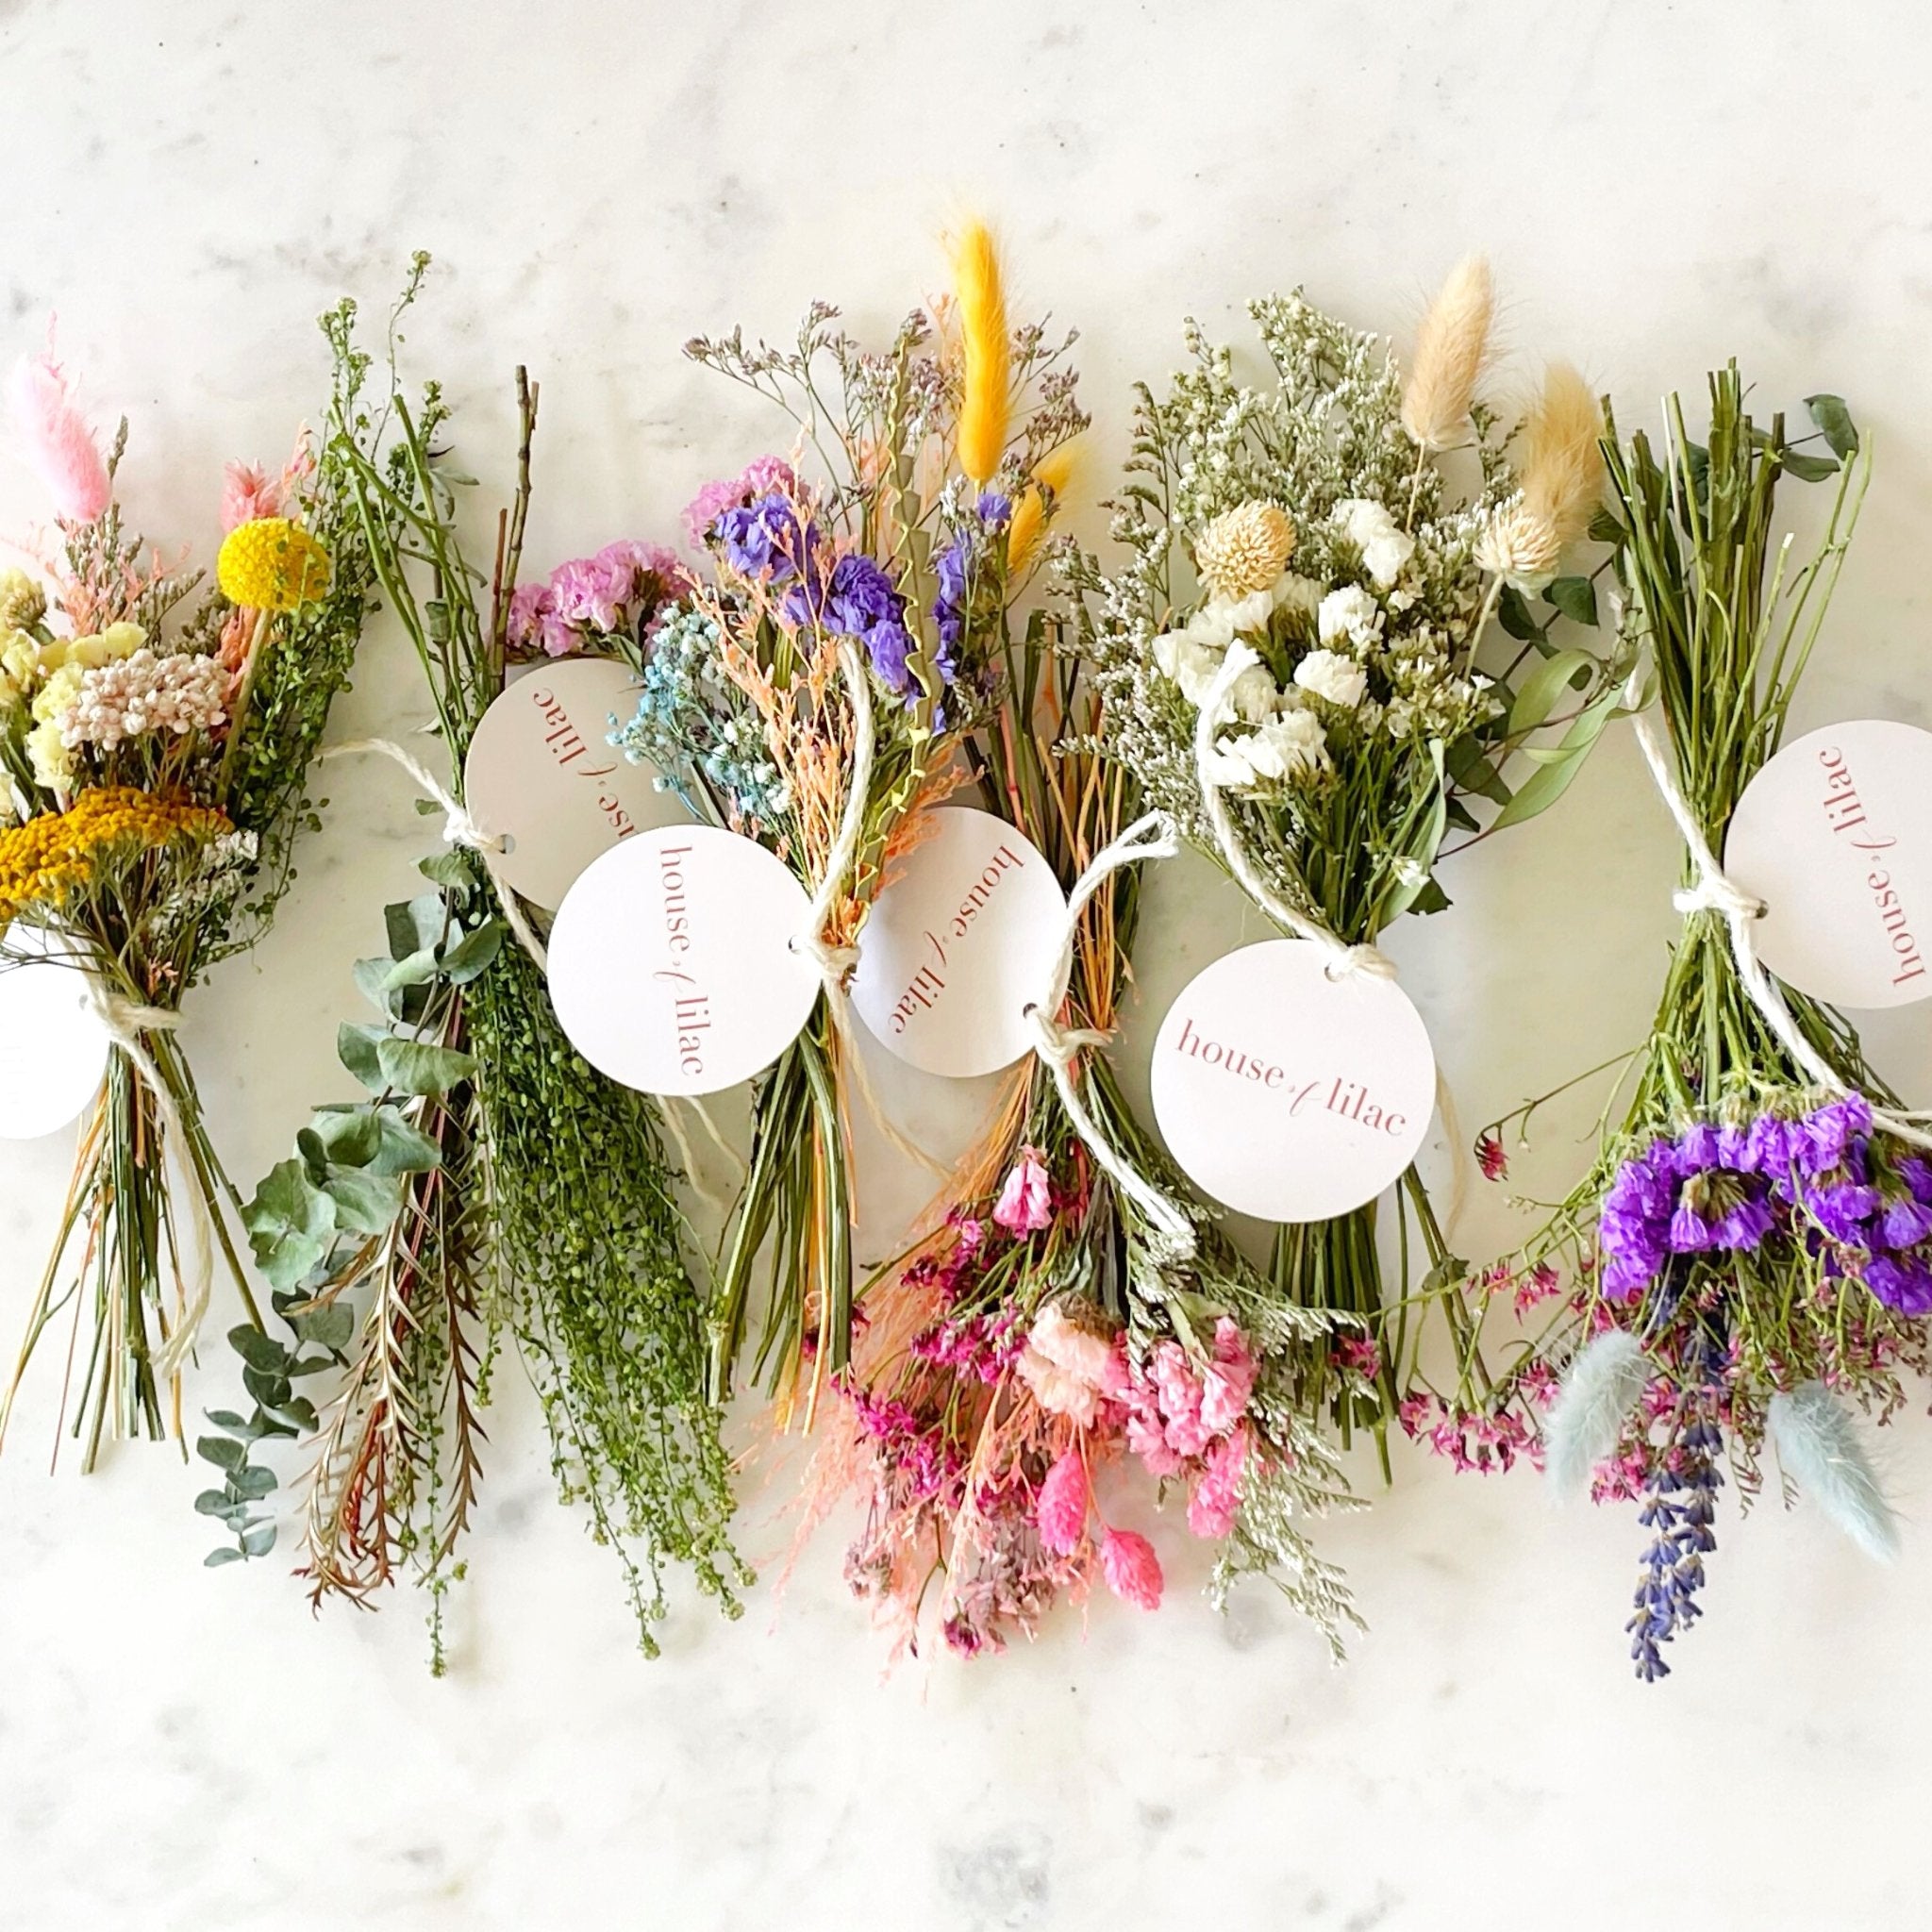 FAICOIA Dried Flowers Bundles Forget Me Not with Stems Natural Dried  Flowers Purple Pink and White Preserved Dried Flowers Bouquet for Floral